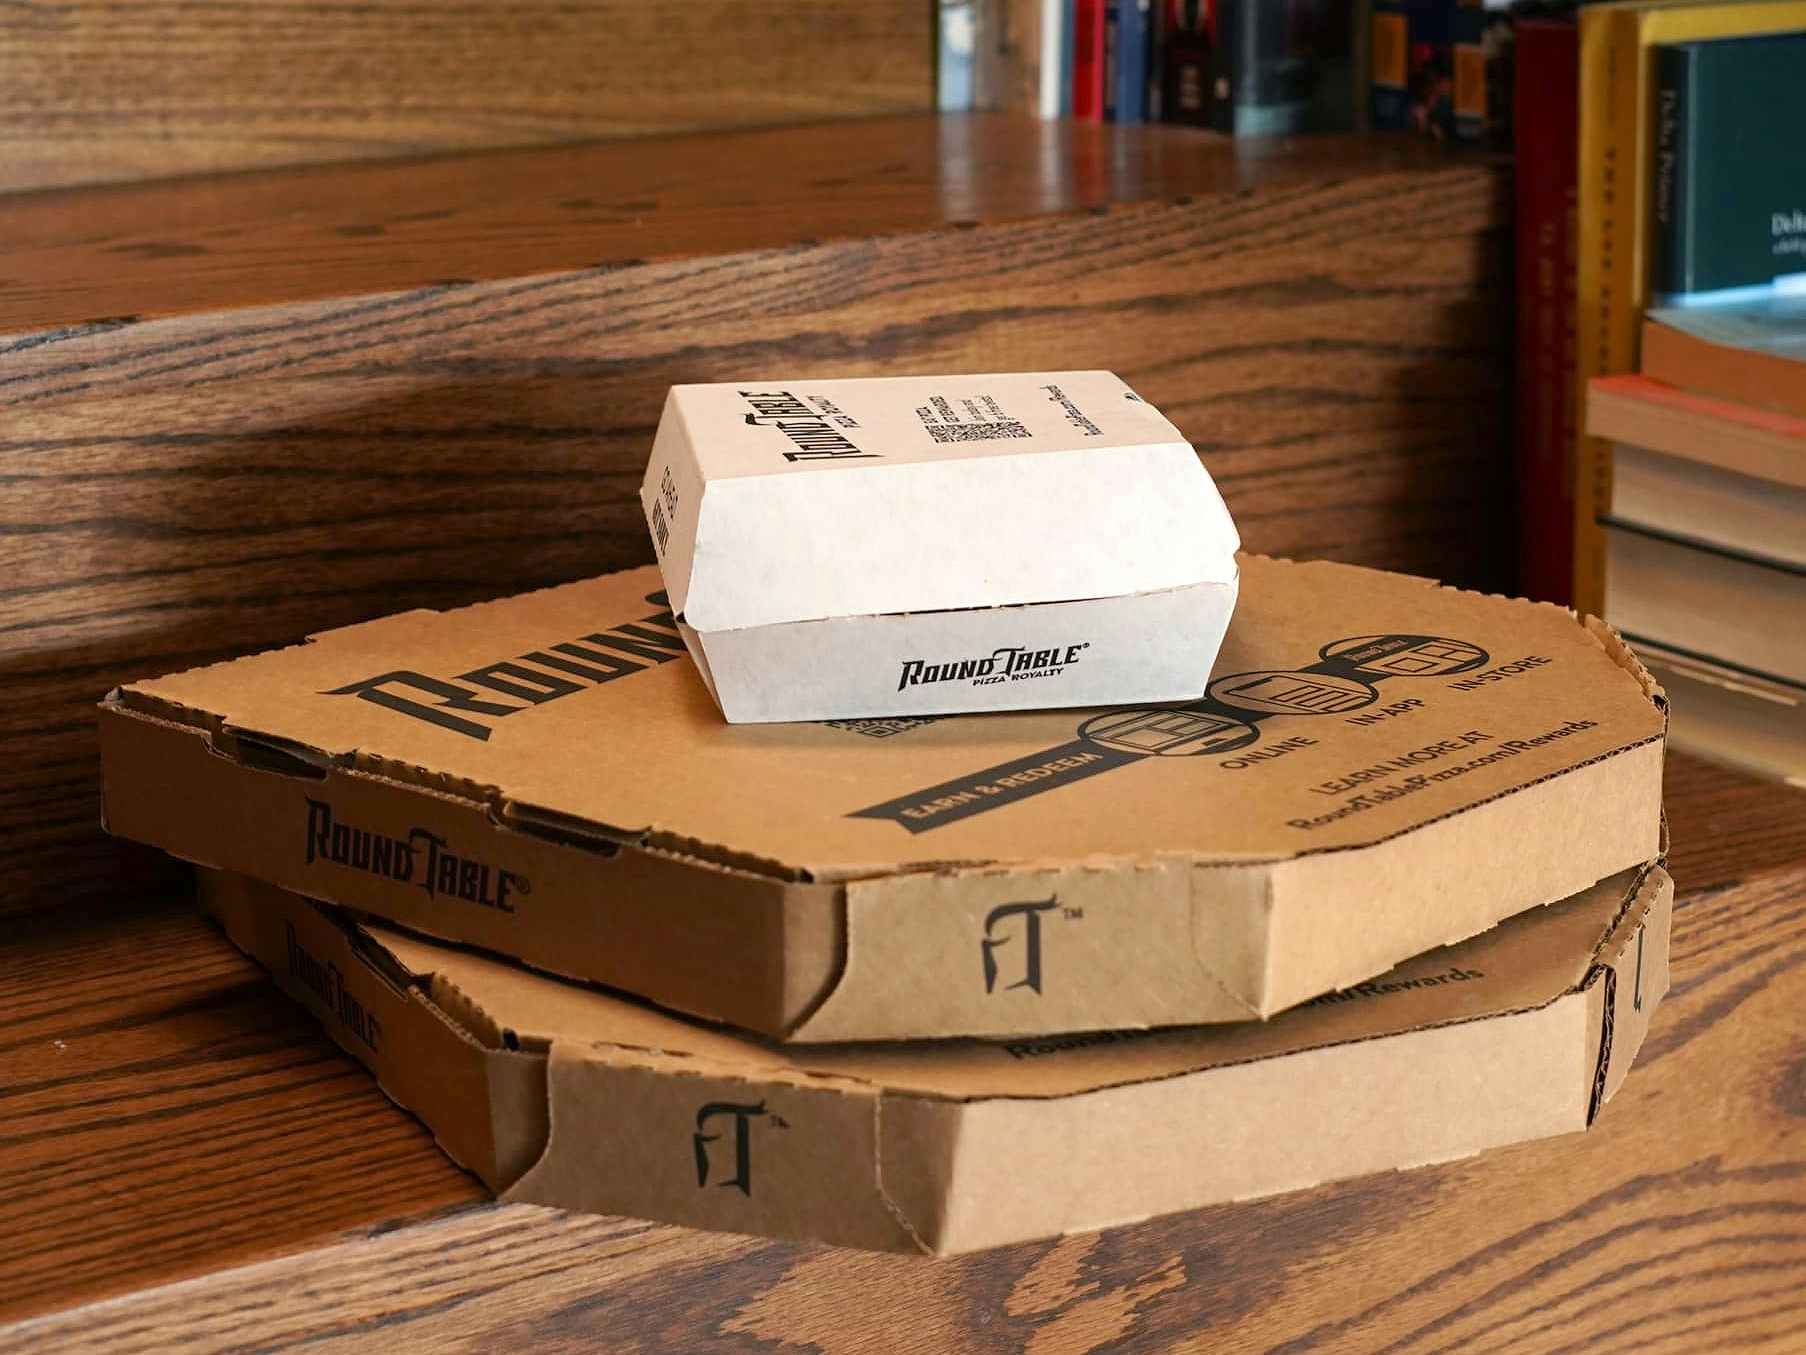 stacked round table pizza boxes and appetizer box